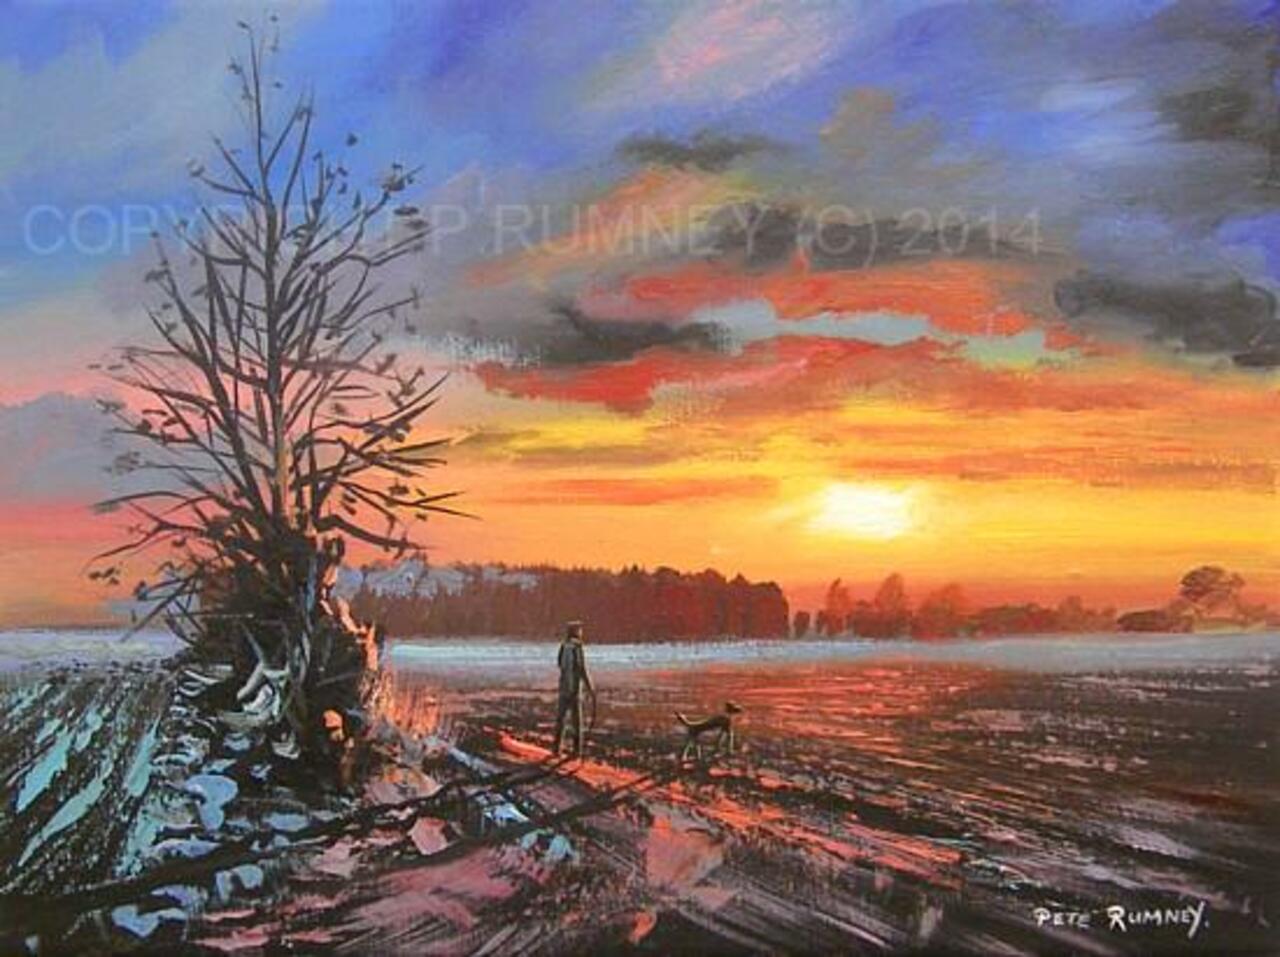 Right, must stop tweeting so I can paint be back soon, studios over this field lol ! http://www.ebay.co.uk/itm/PETE-RUMNEY-FINE-ART-MODERN-OIL-ACRYLIC-PAINTING-ORIGINAL-SUNSET-FARMLAND-DOG-NR-/311201294289 #art http://t.co/xQw6PTmnYw